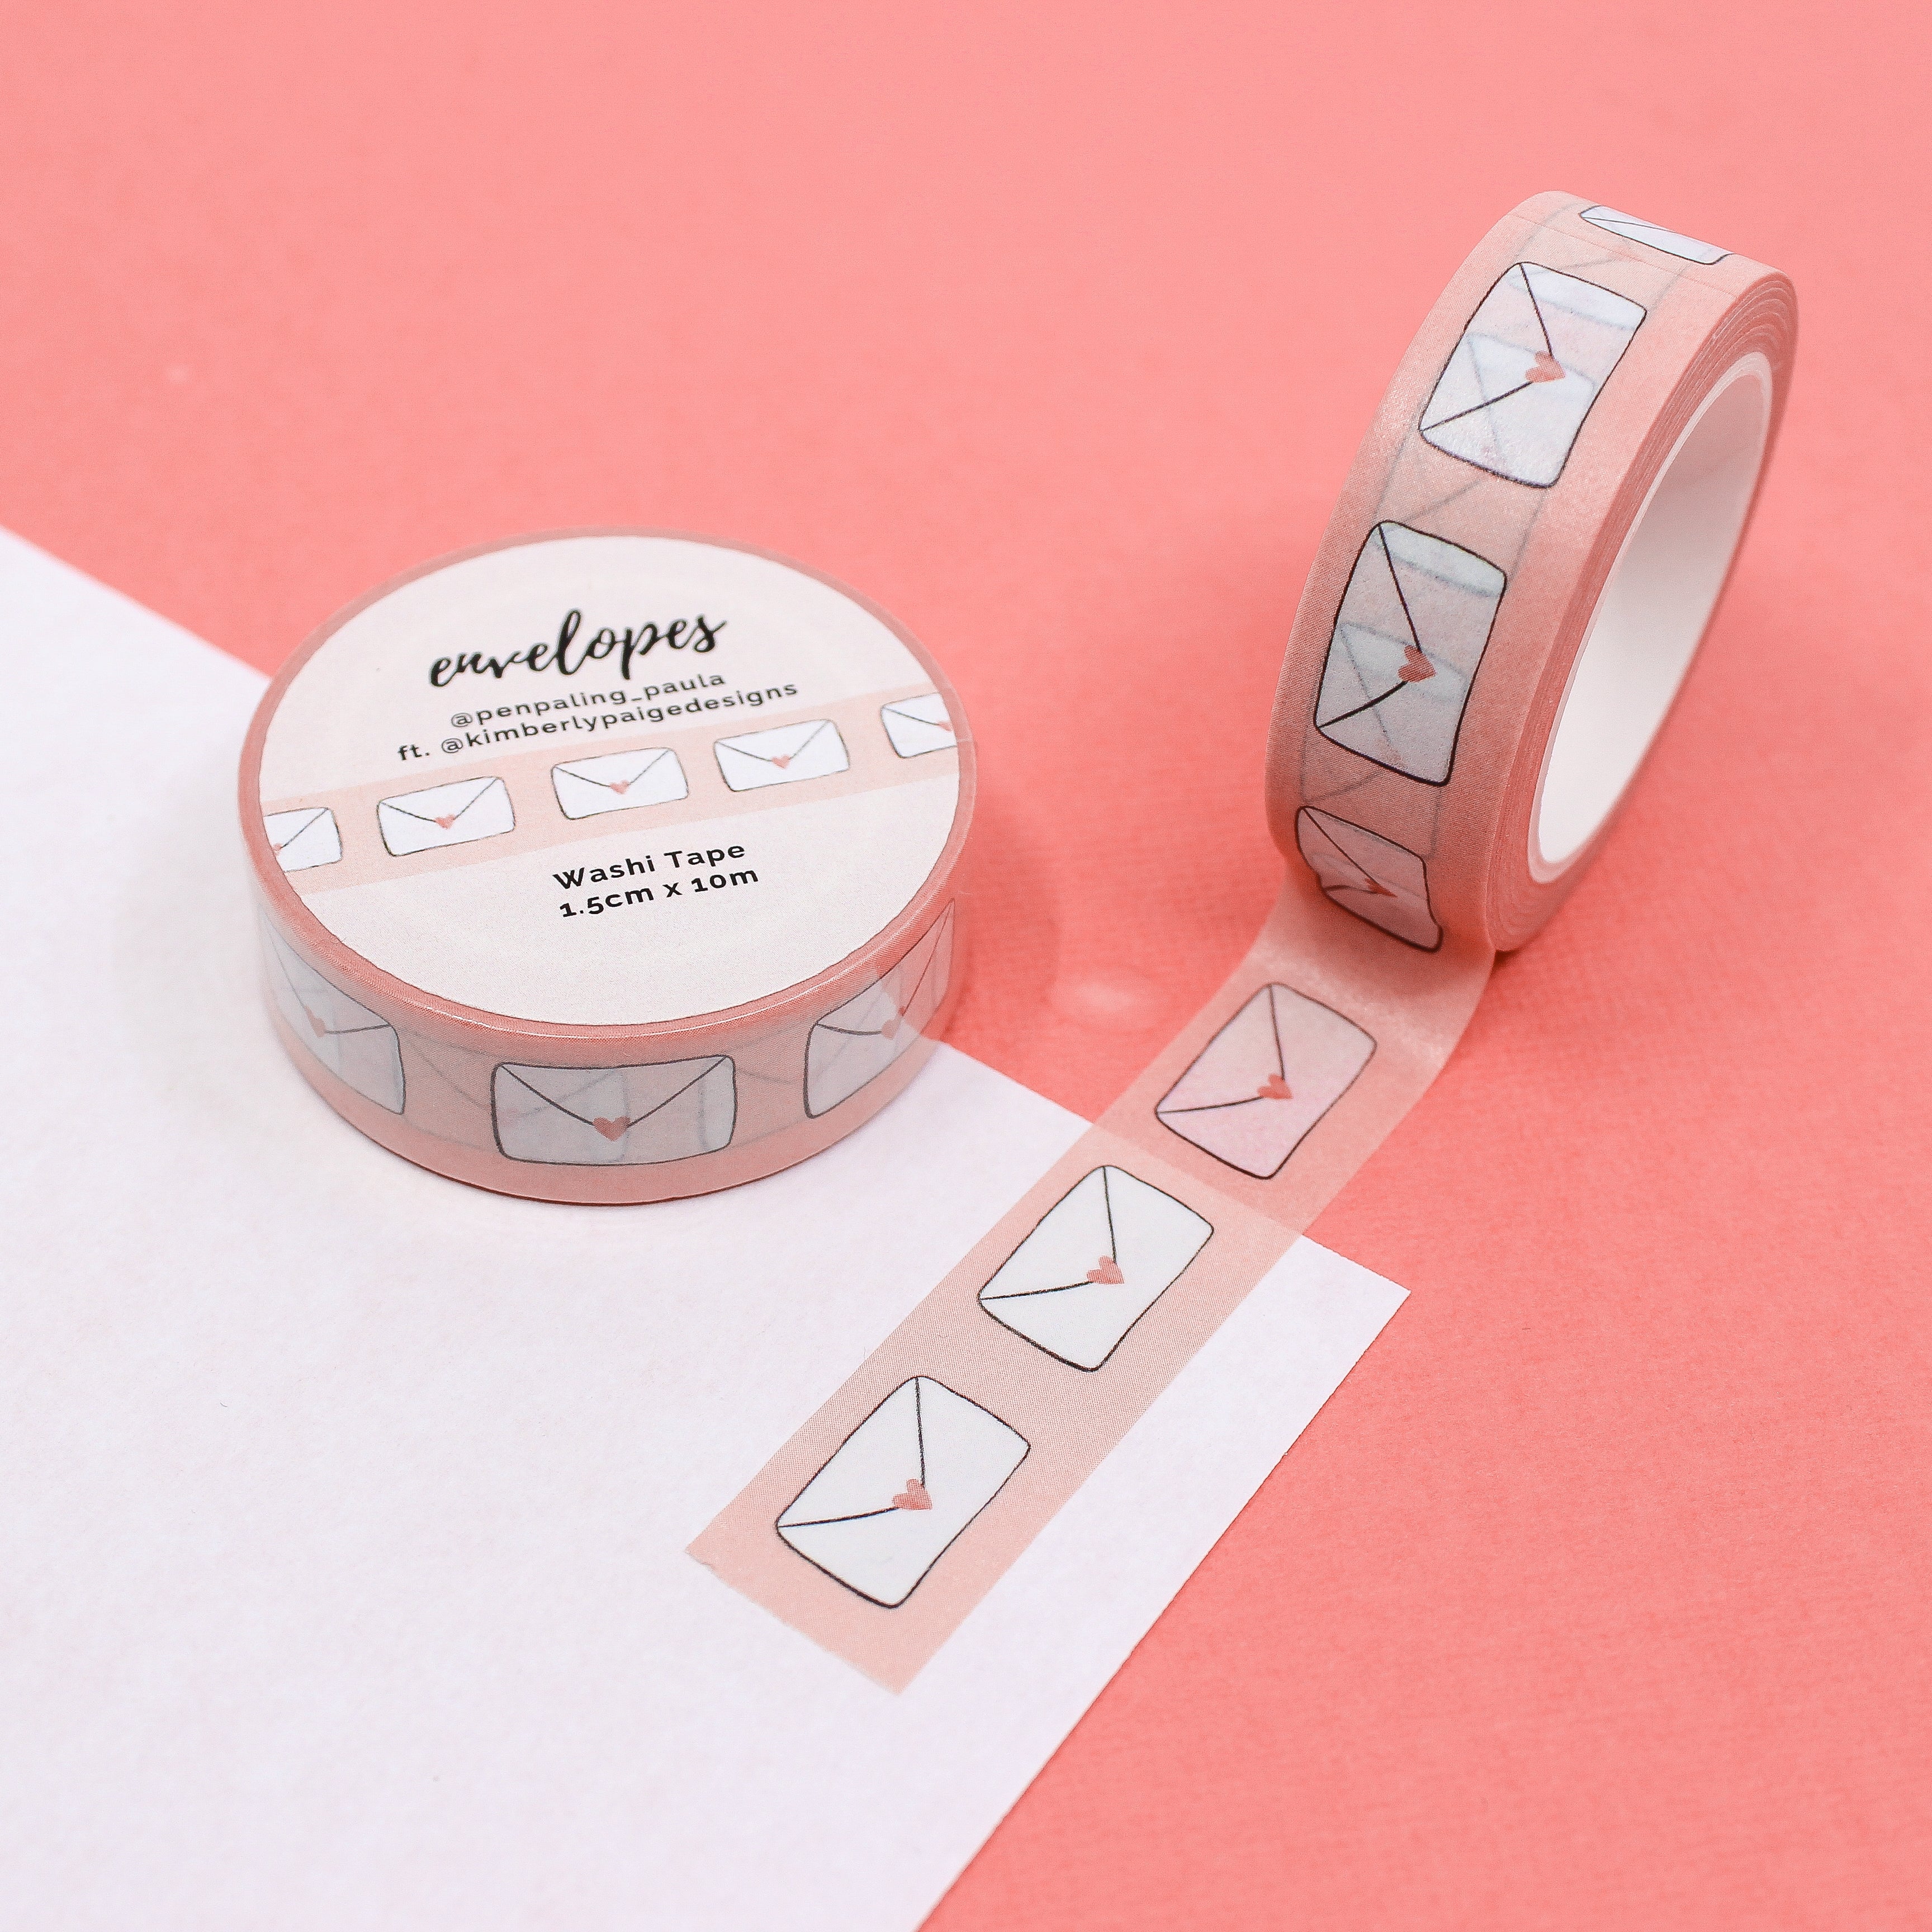 This is a white letter mail themed washi tape from BBB Supplies Craft Shop